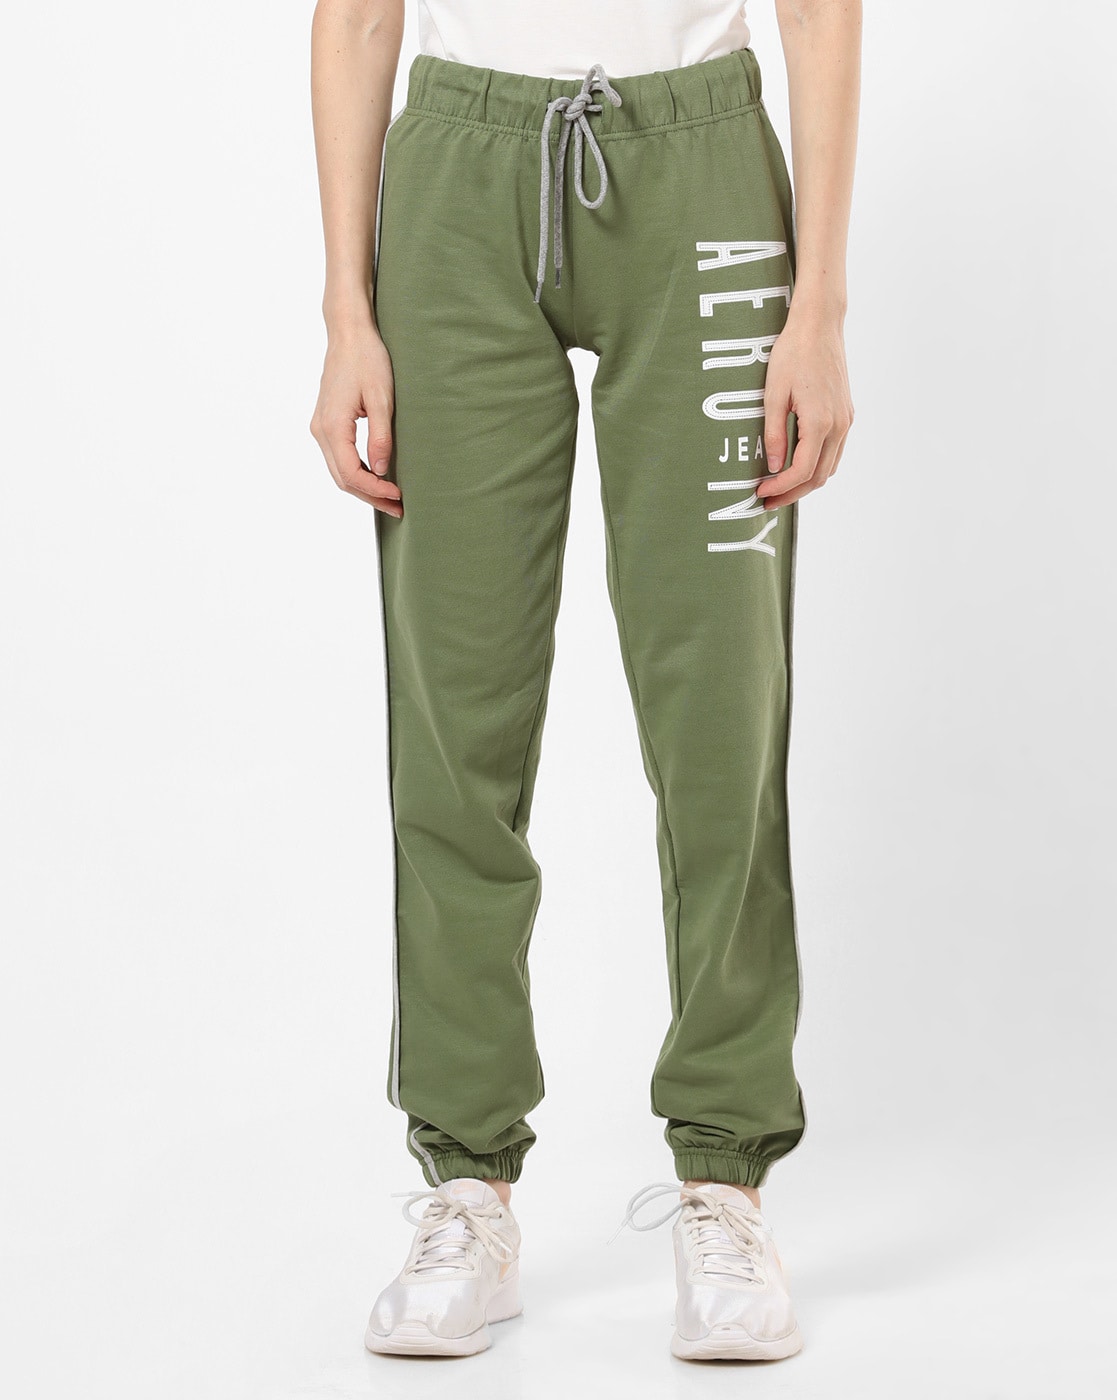 olive jeans womens